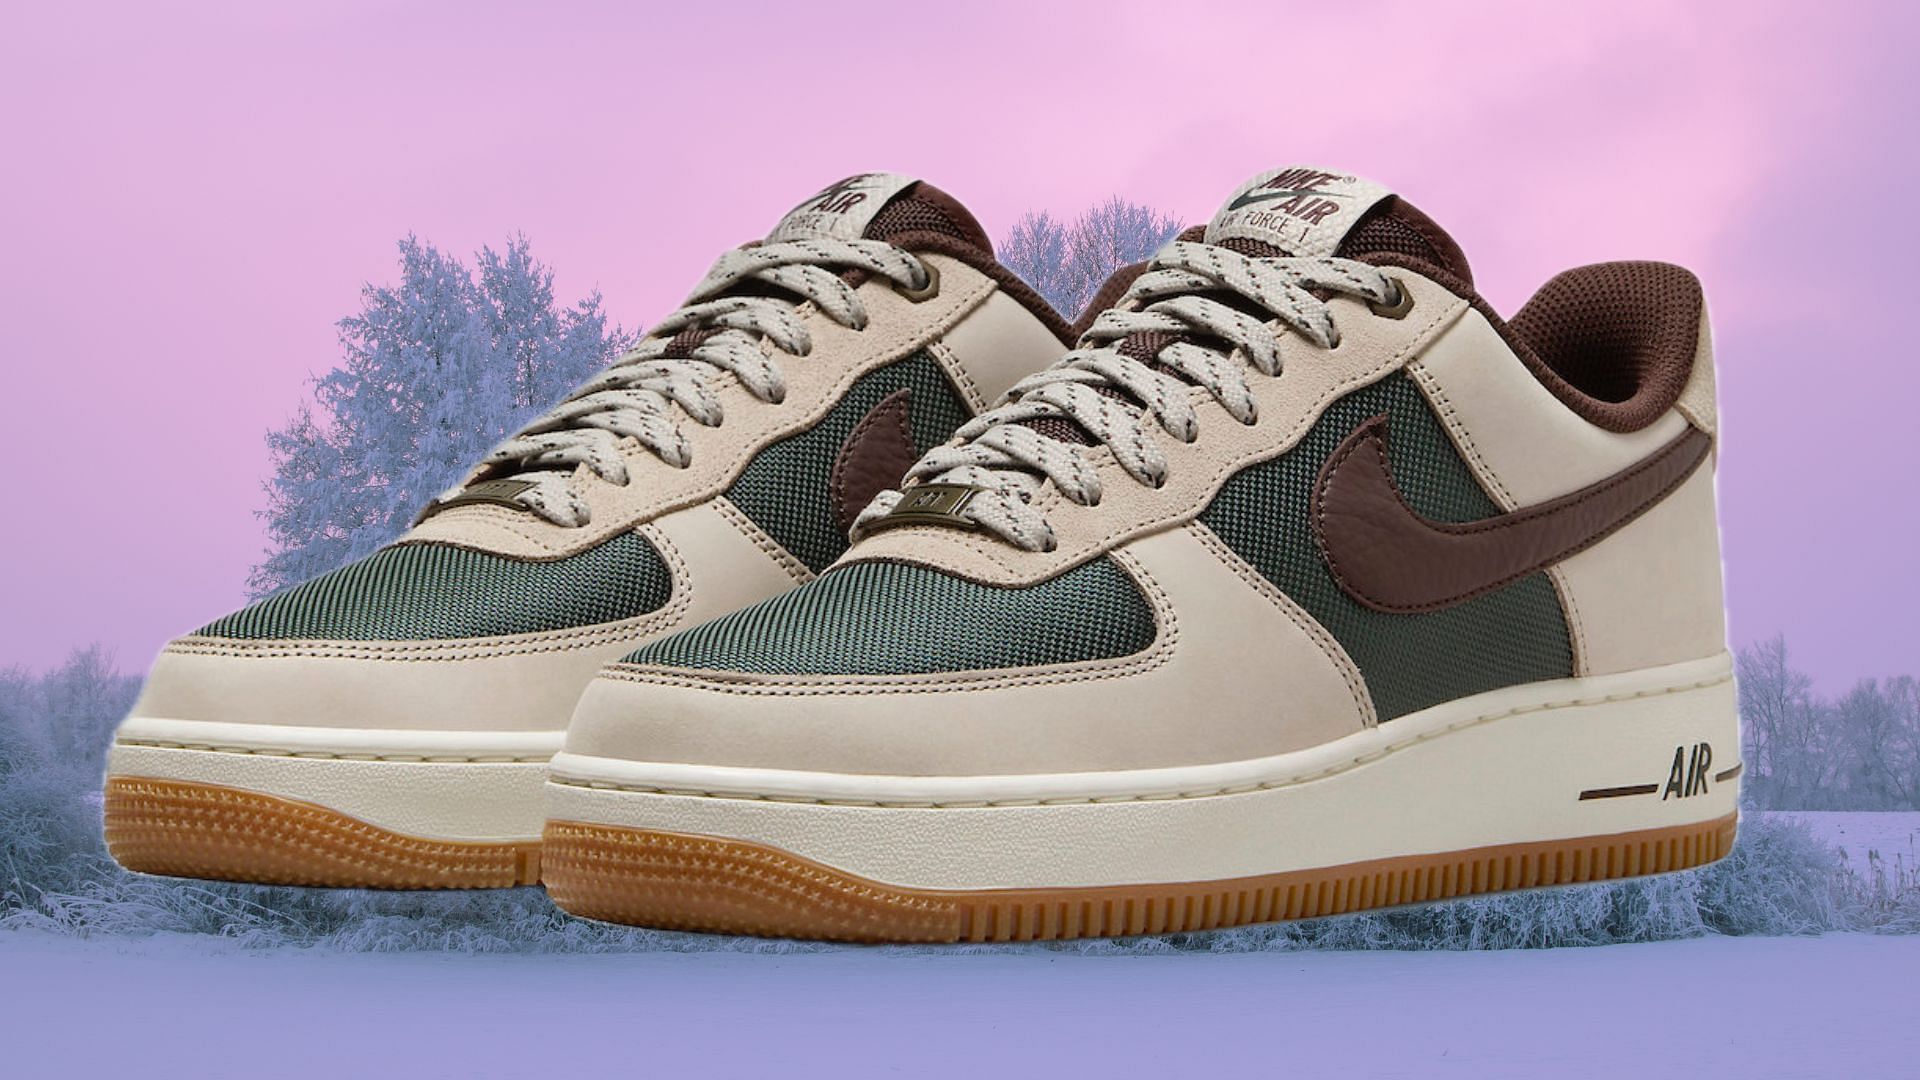 Nike Air Force 1 Low Suede Outdoor Green Perfect For Fall/Winter